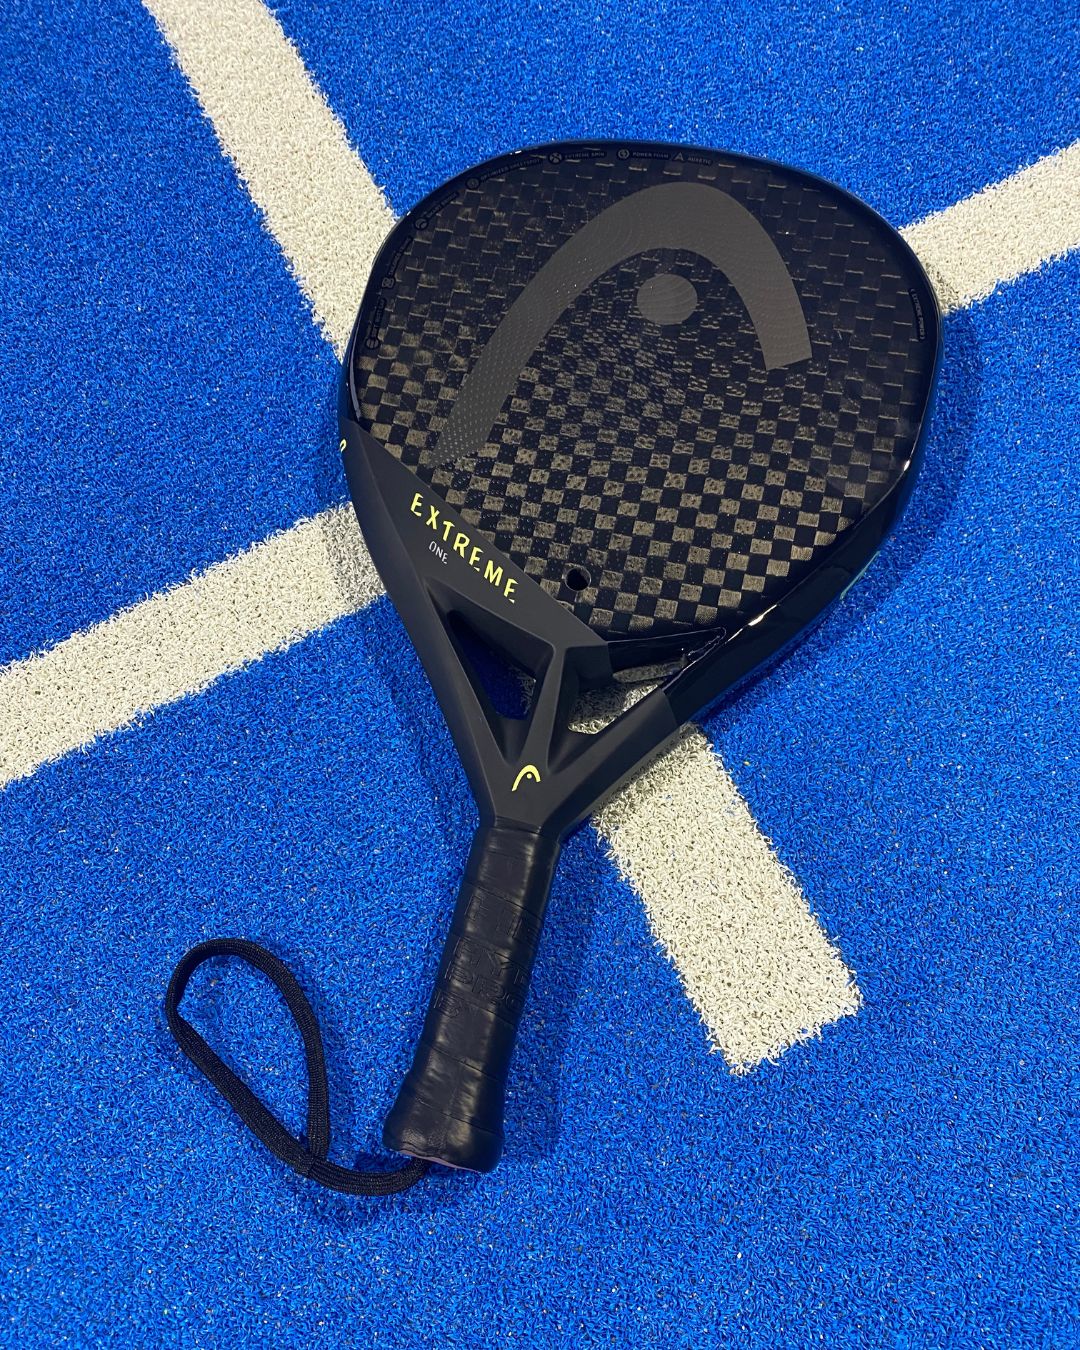 we unveil the EXTREME ONE, the latest in HEAD padel racquets, which is a revolutionary design with a unique construction.